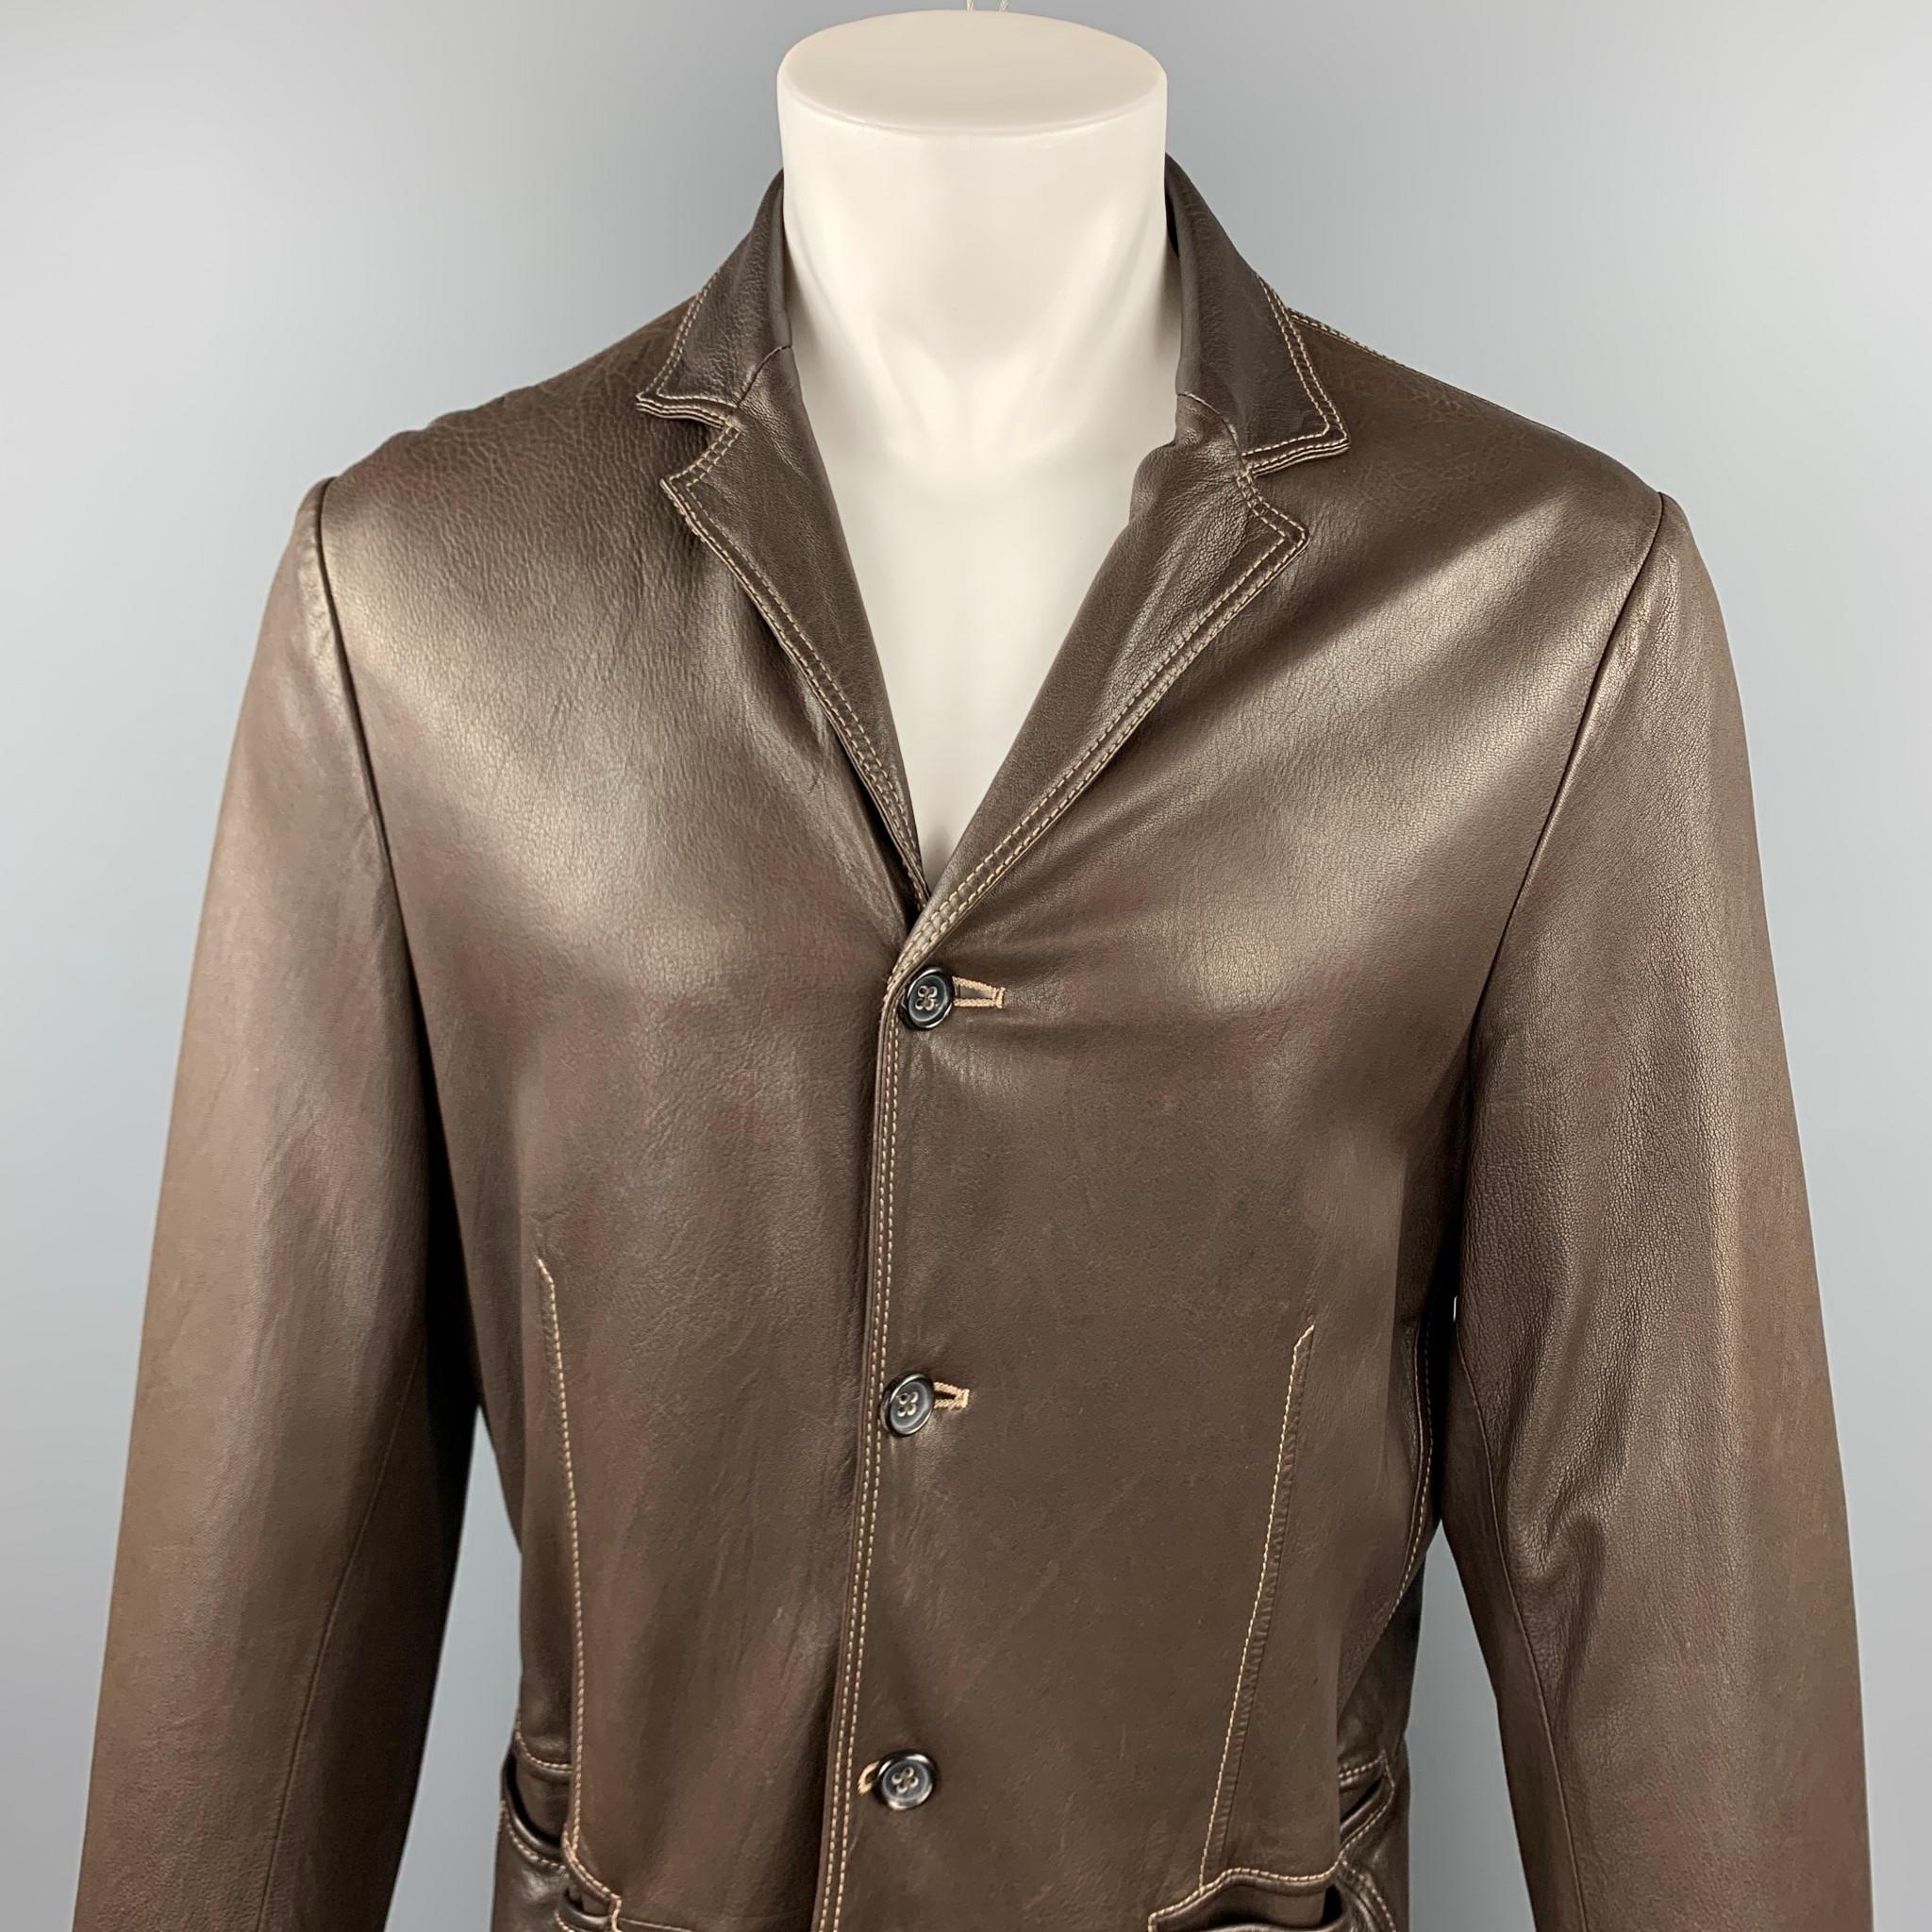 JIL SANDER jacket comes in a brown leather with contrast stitching featuring a notch lapel, slit pockets, and a three button closure. Made in Italy. 

Very Good Pre-Owned Condition.
Marked: IT 52

Measurements:

Shoulder: 17.5 in.
Chest: 42 in.